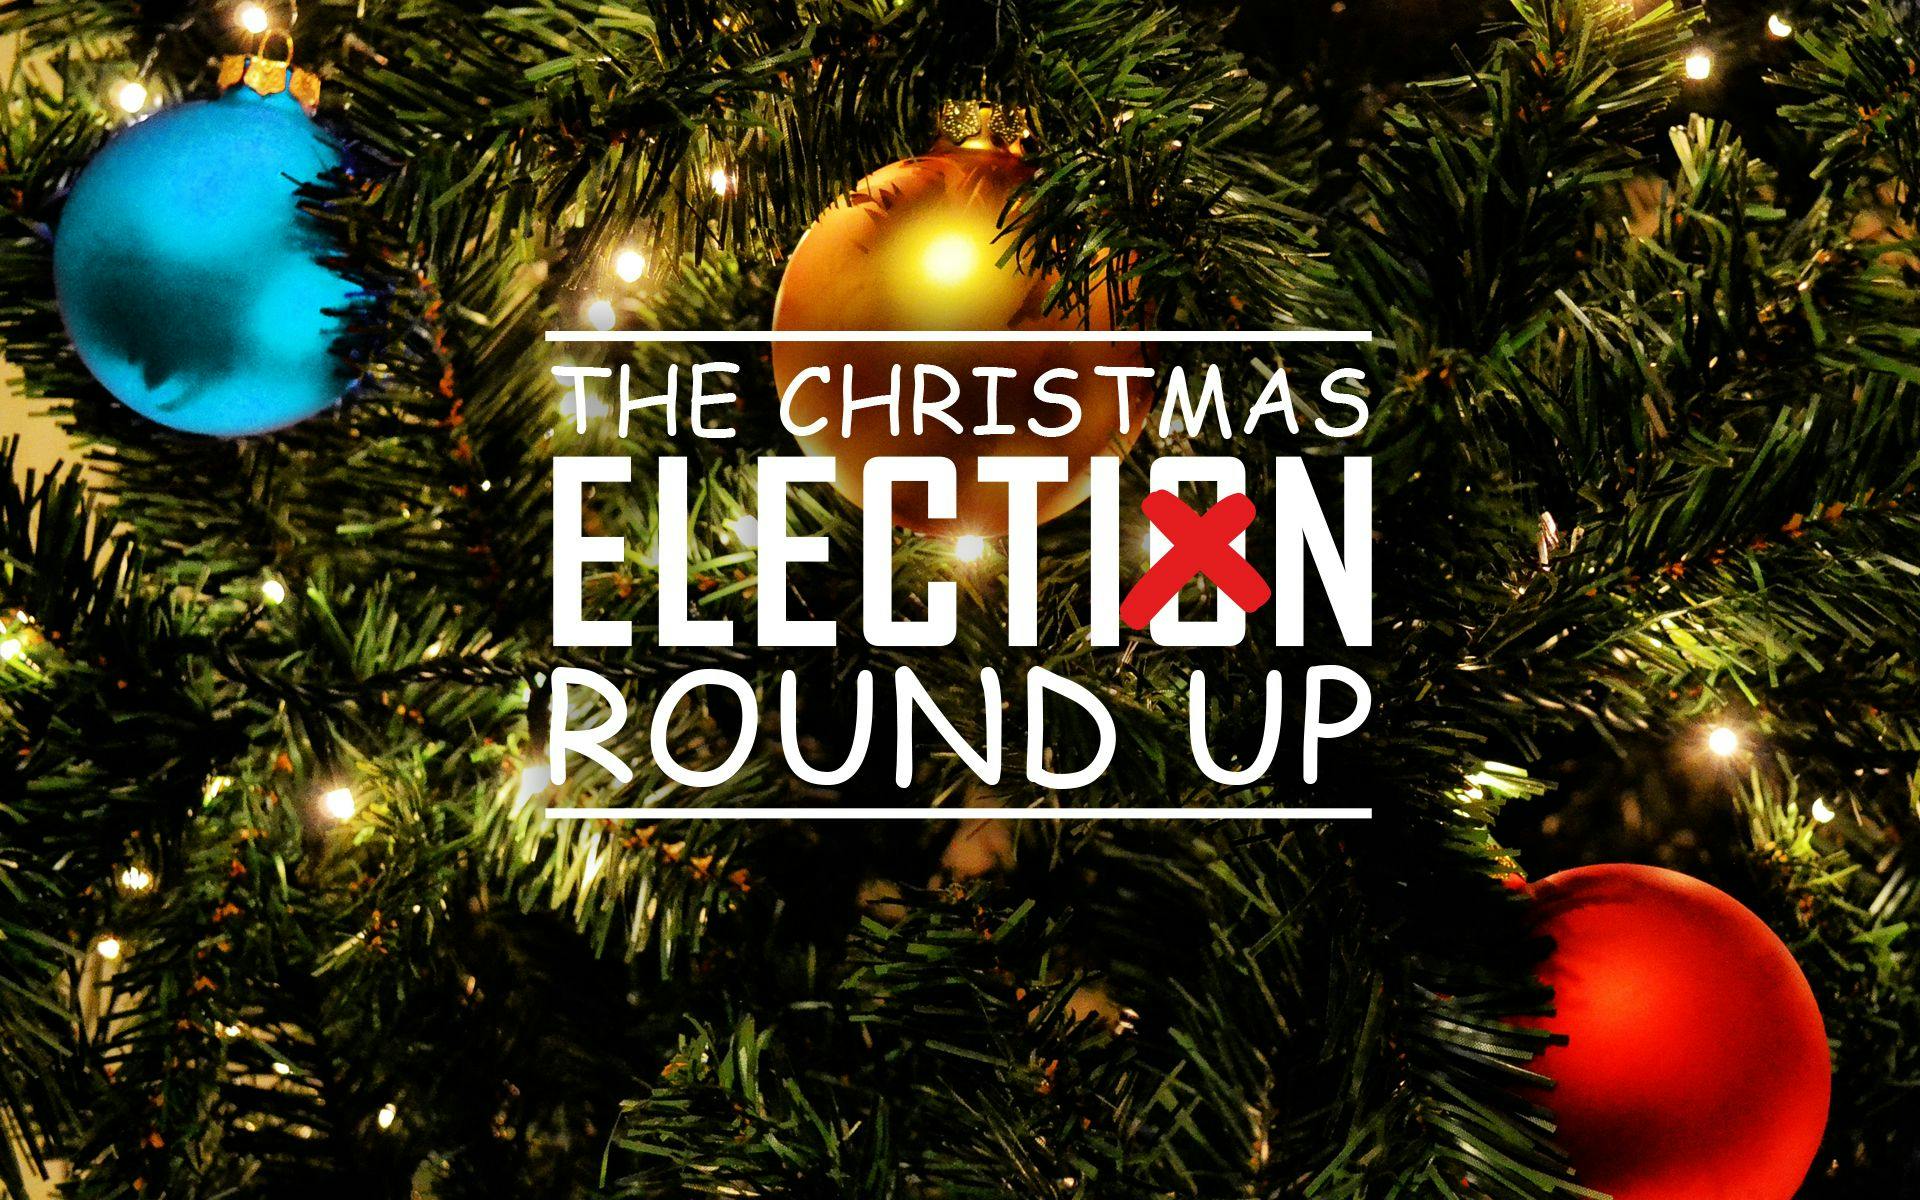 CHRISTMAS ELECTION ROUND UP